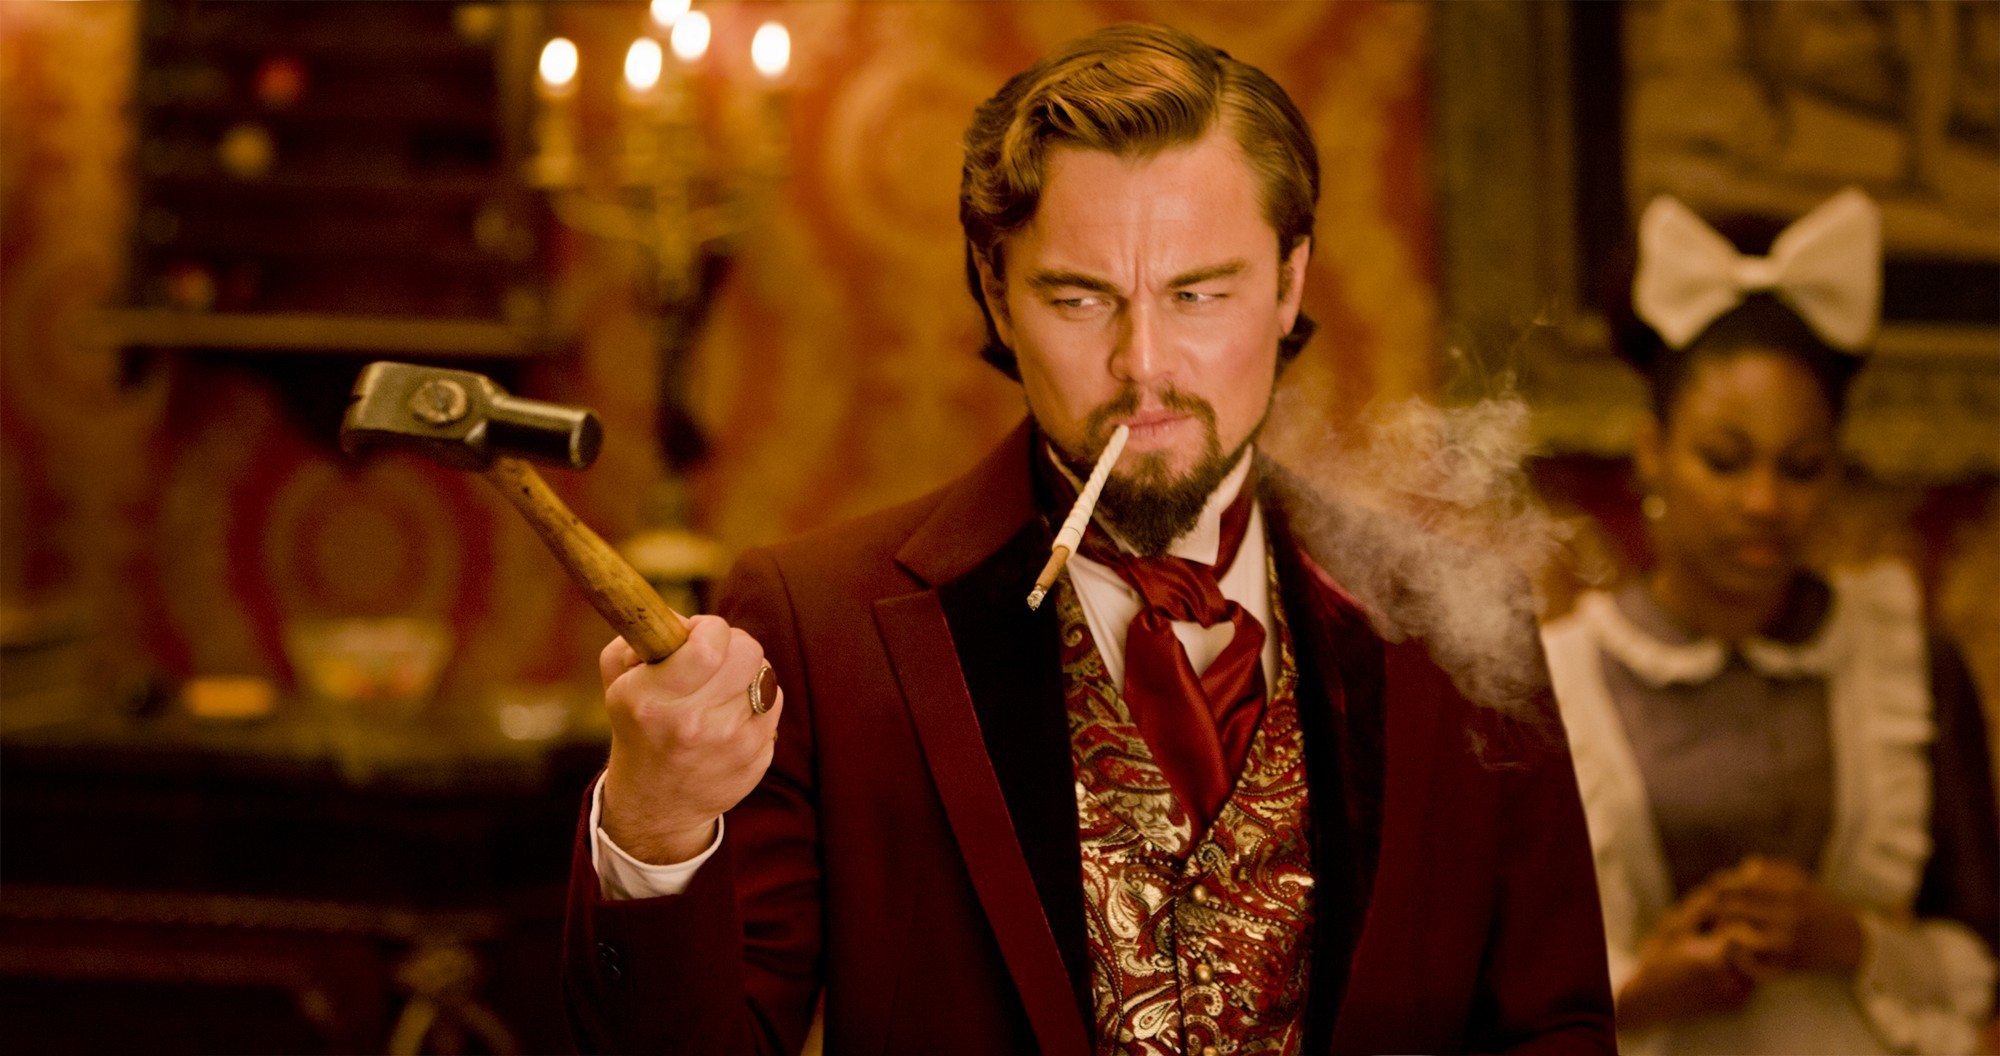 Leonardo DiCaprio stars as Calvin Candie in The Weinstein Company's Django Unchained (2012). Photo credit by Andrew Cooper.